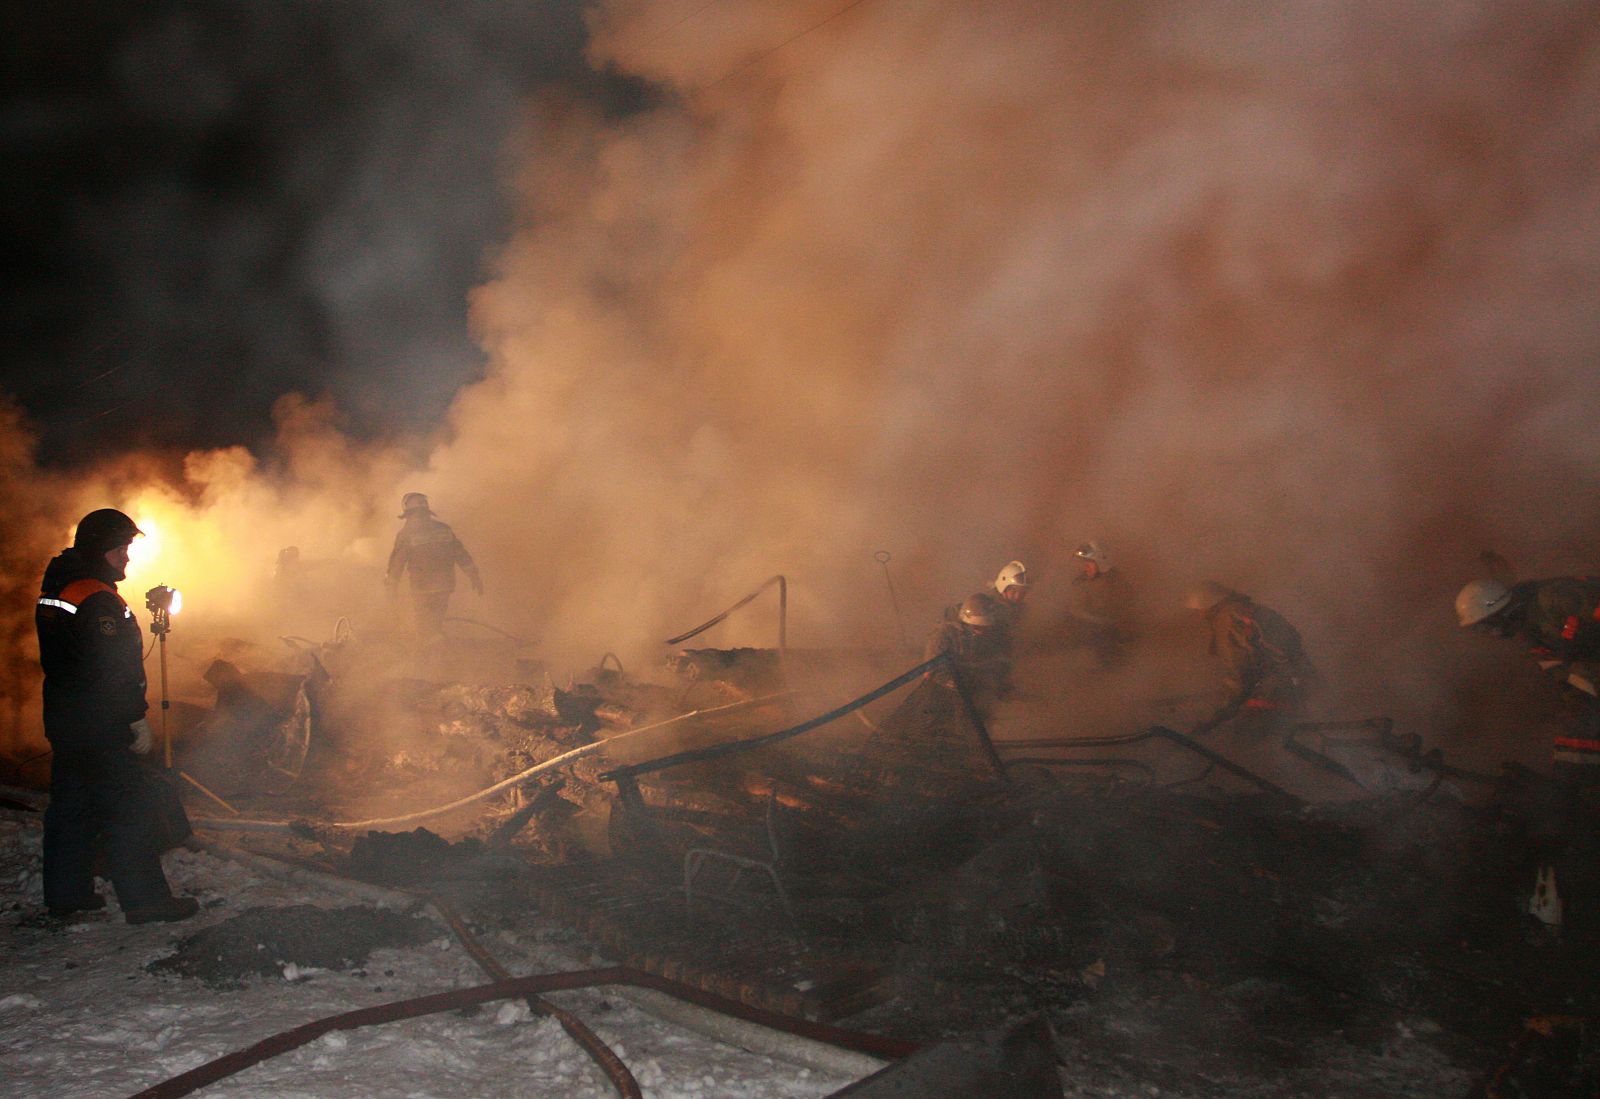 Firefighters search through the rubble of an old people's home in the village of Podyelsk